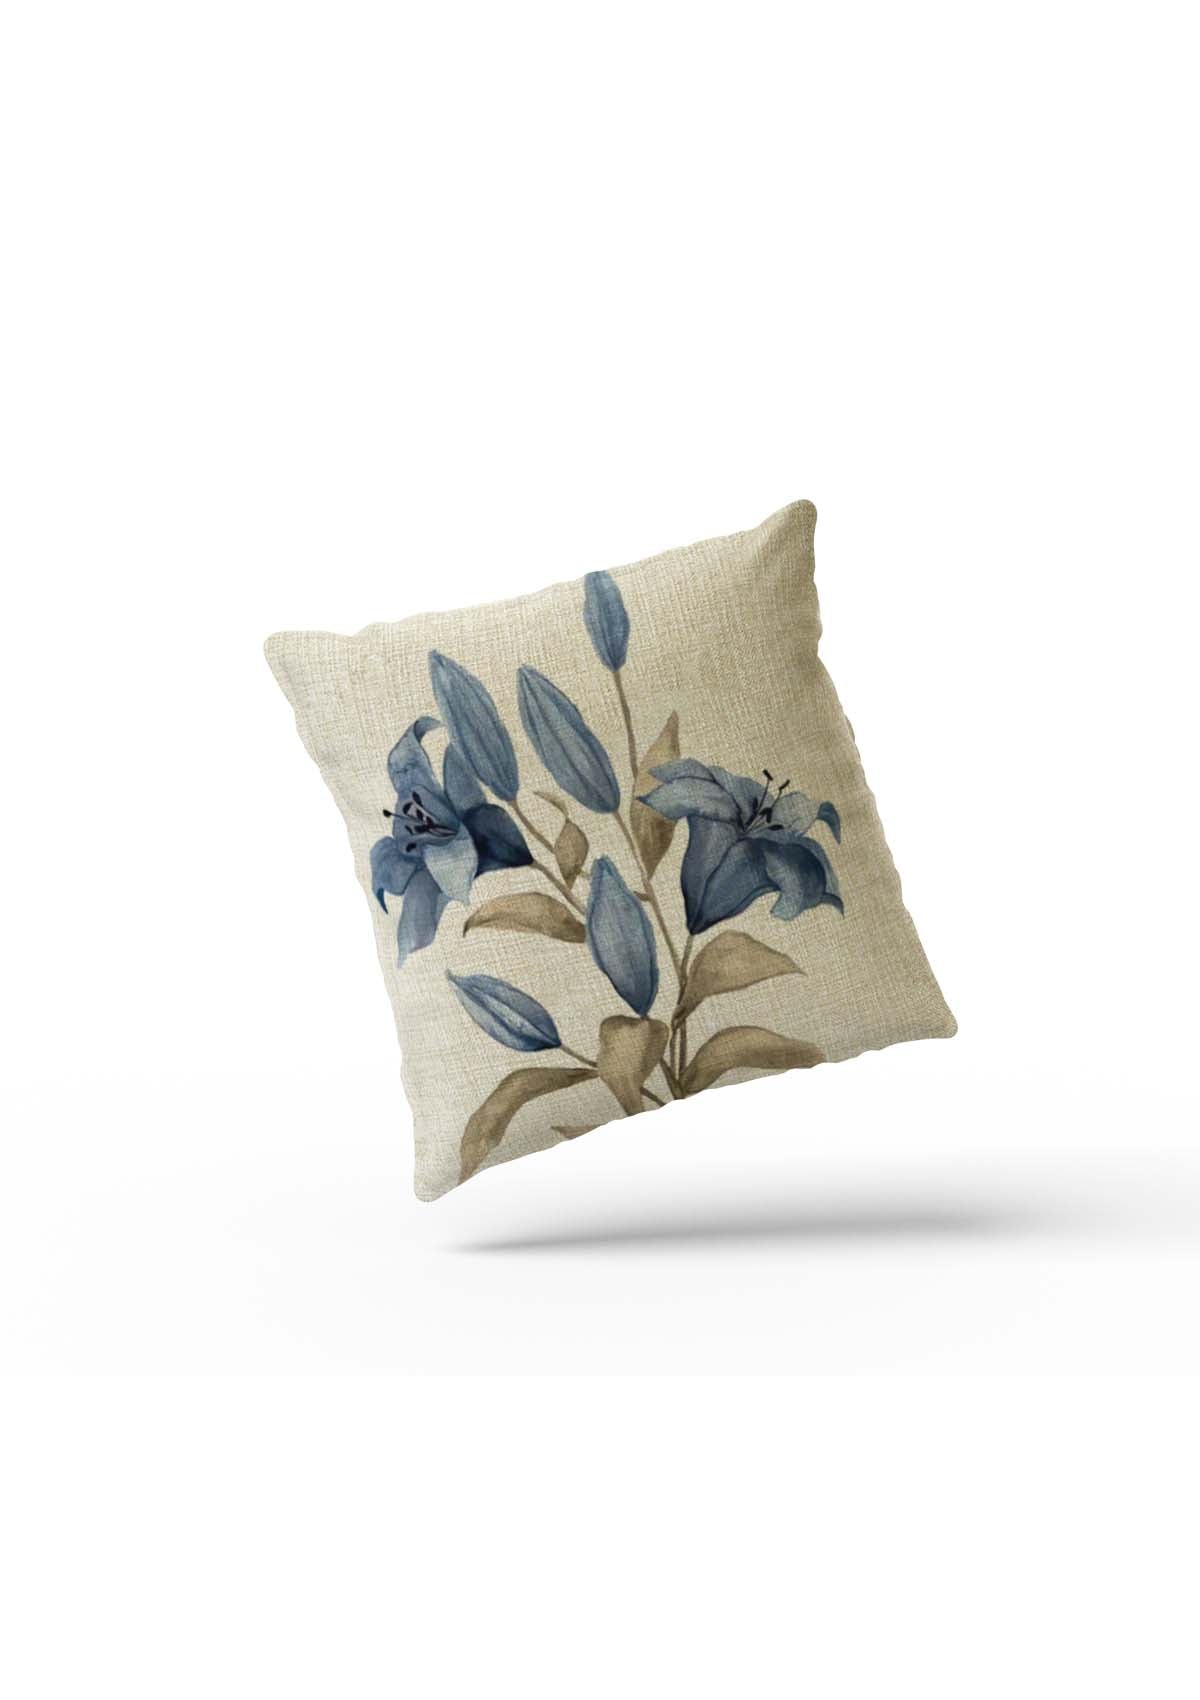 Flowered Cushion Covers - Floral Pillow Cases | Shop Floral Cushion Covers